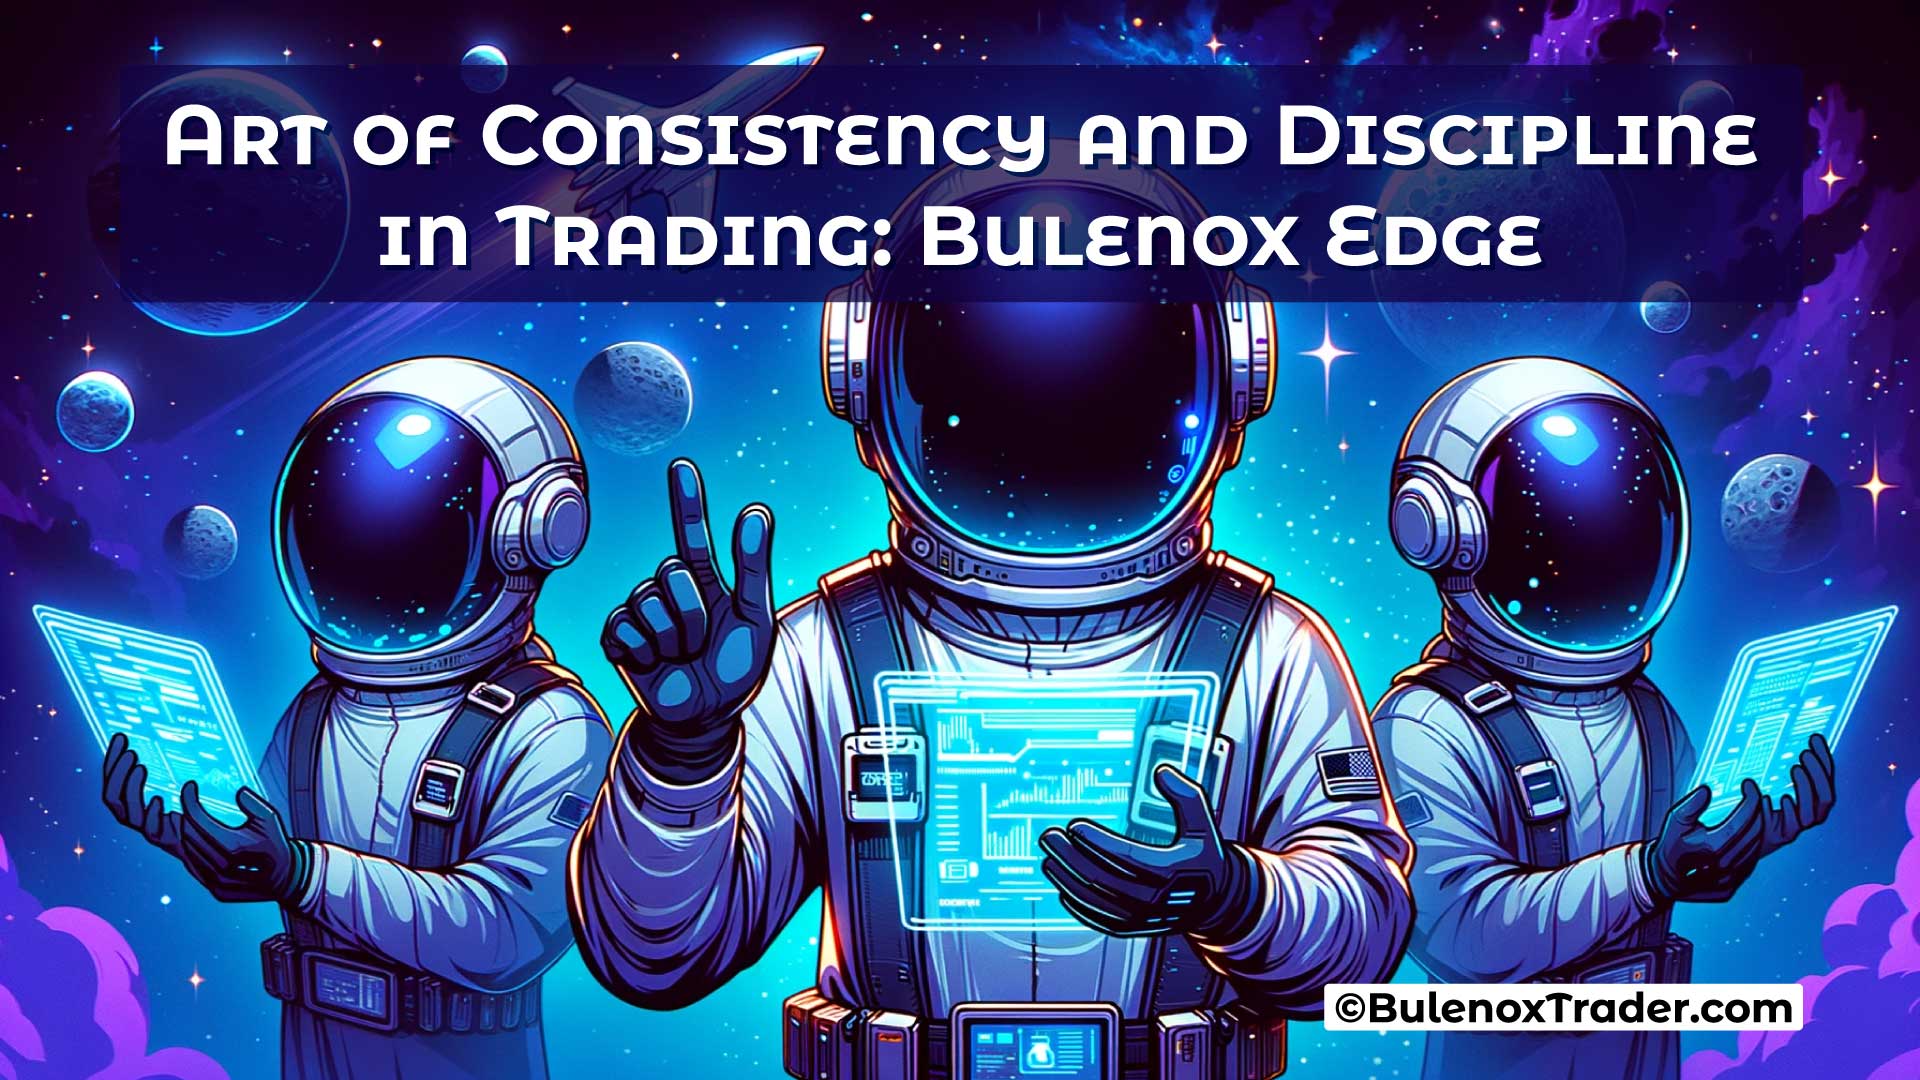 Art-of-Consistency-and-Discipline-in-Trading-Bulenox-Edge-on-Bulenox-Trader-Website